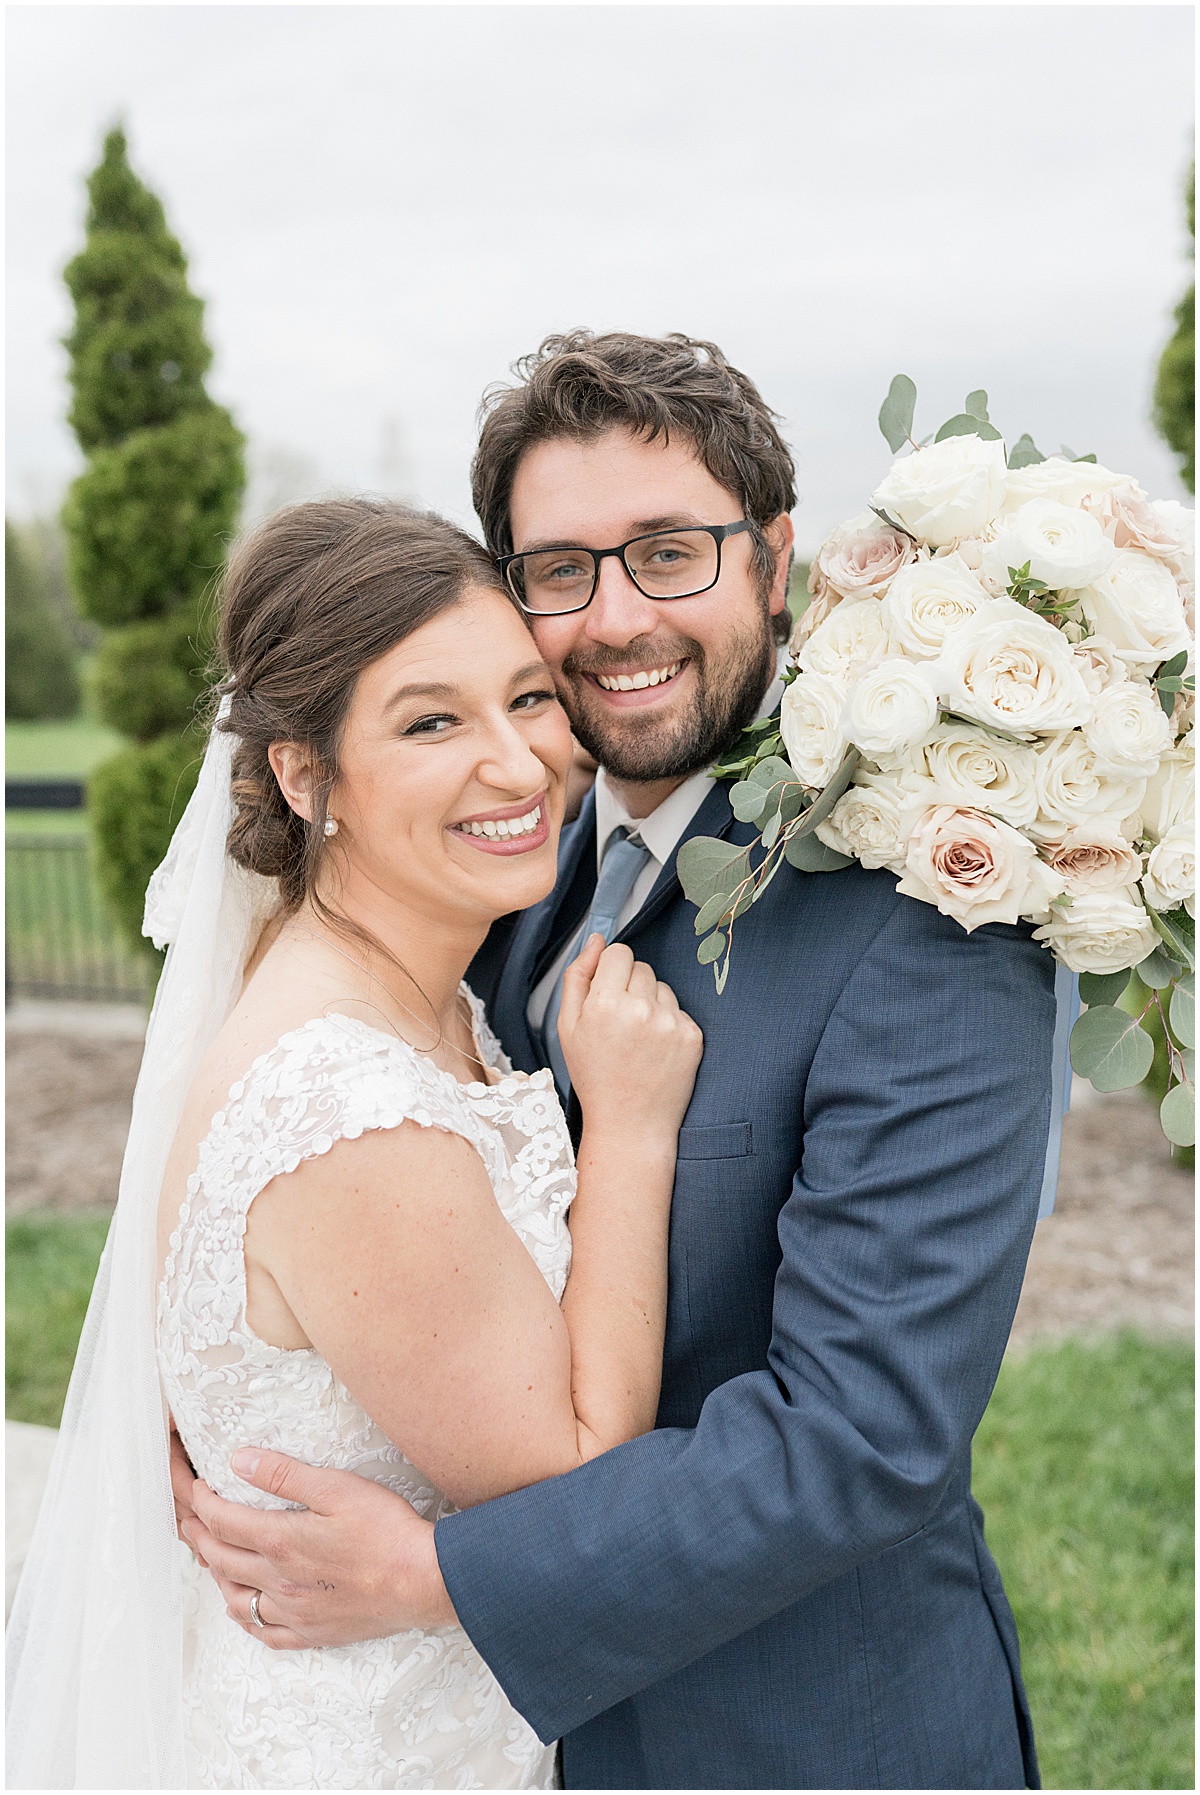 Couple with white bouquet at Coxhall Gardens in Carmel, Indiana